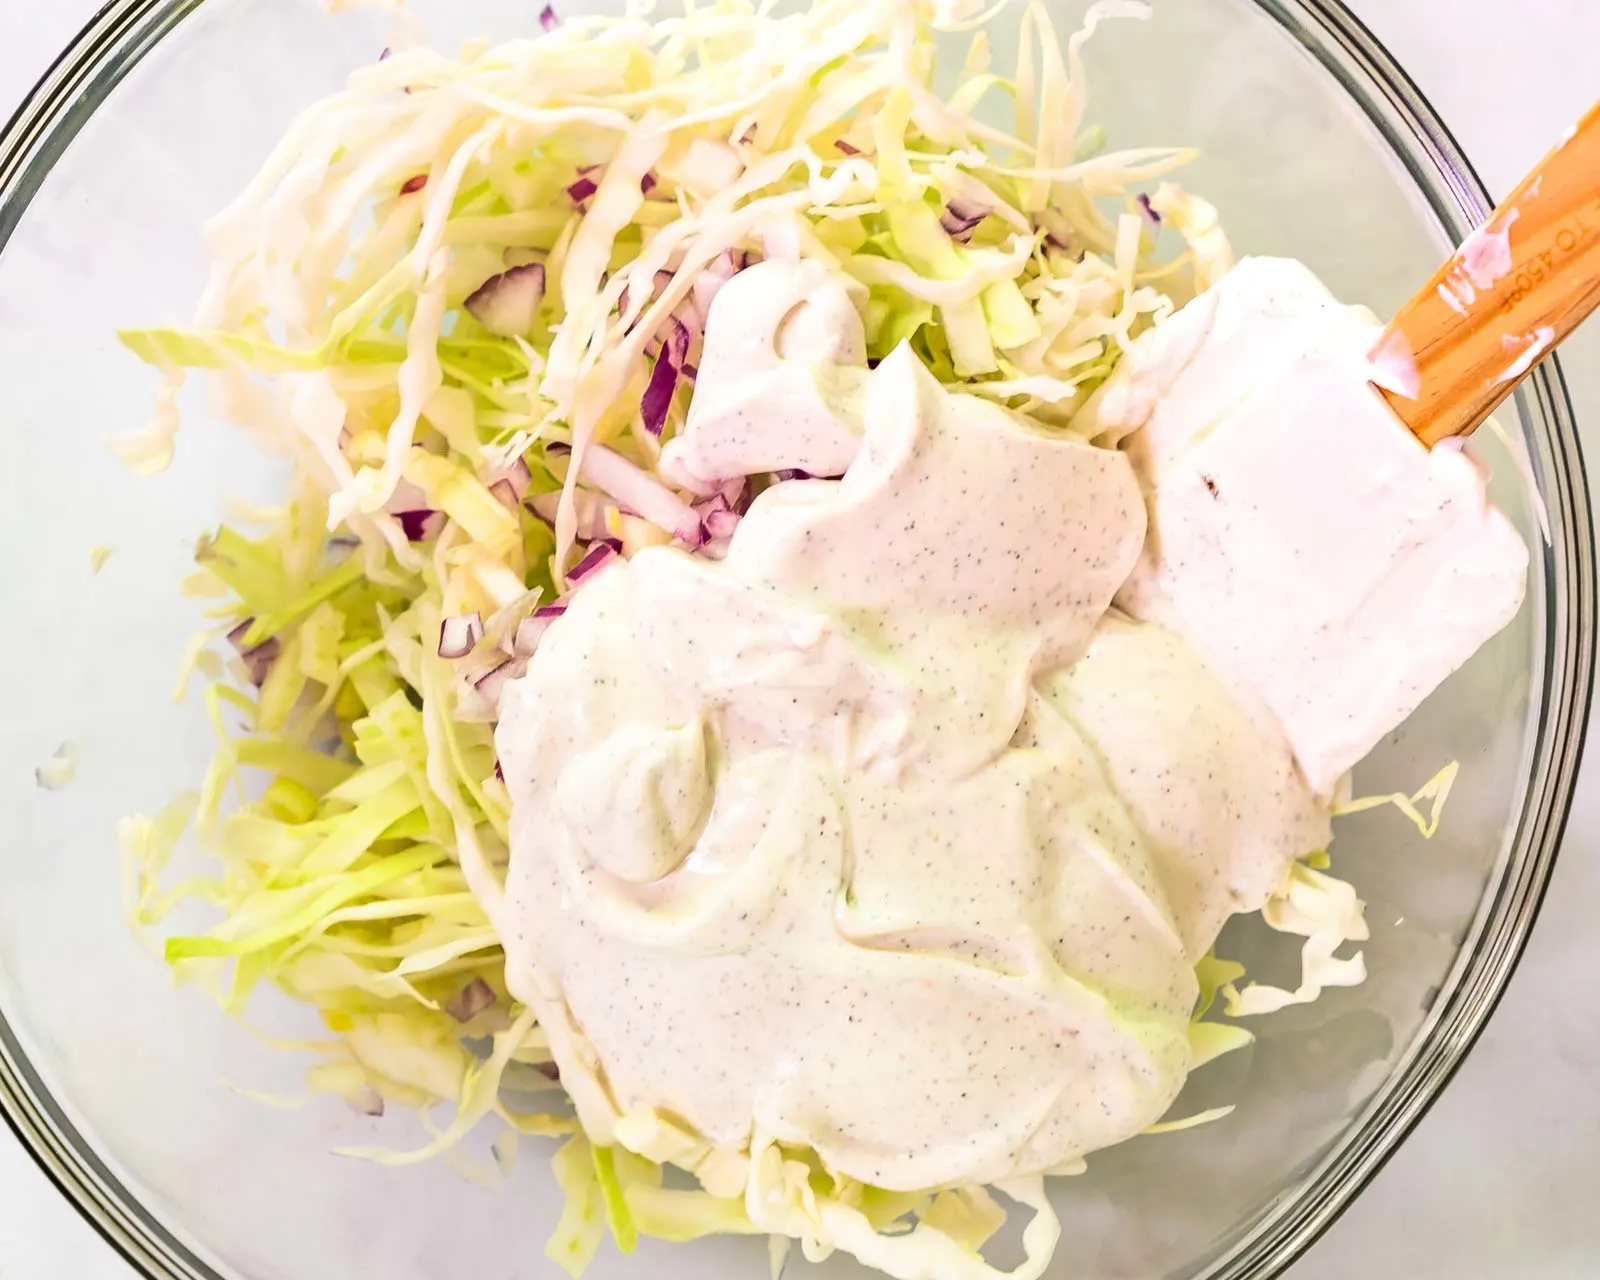 Top down view of shredded cabbage with slaw sauce sitting on top.